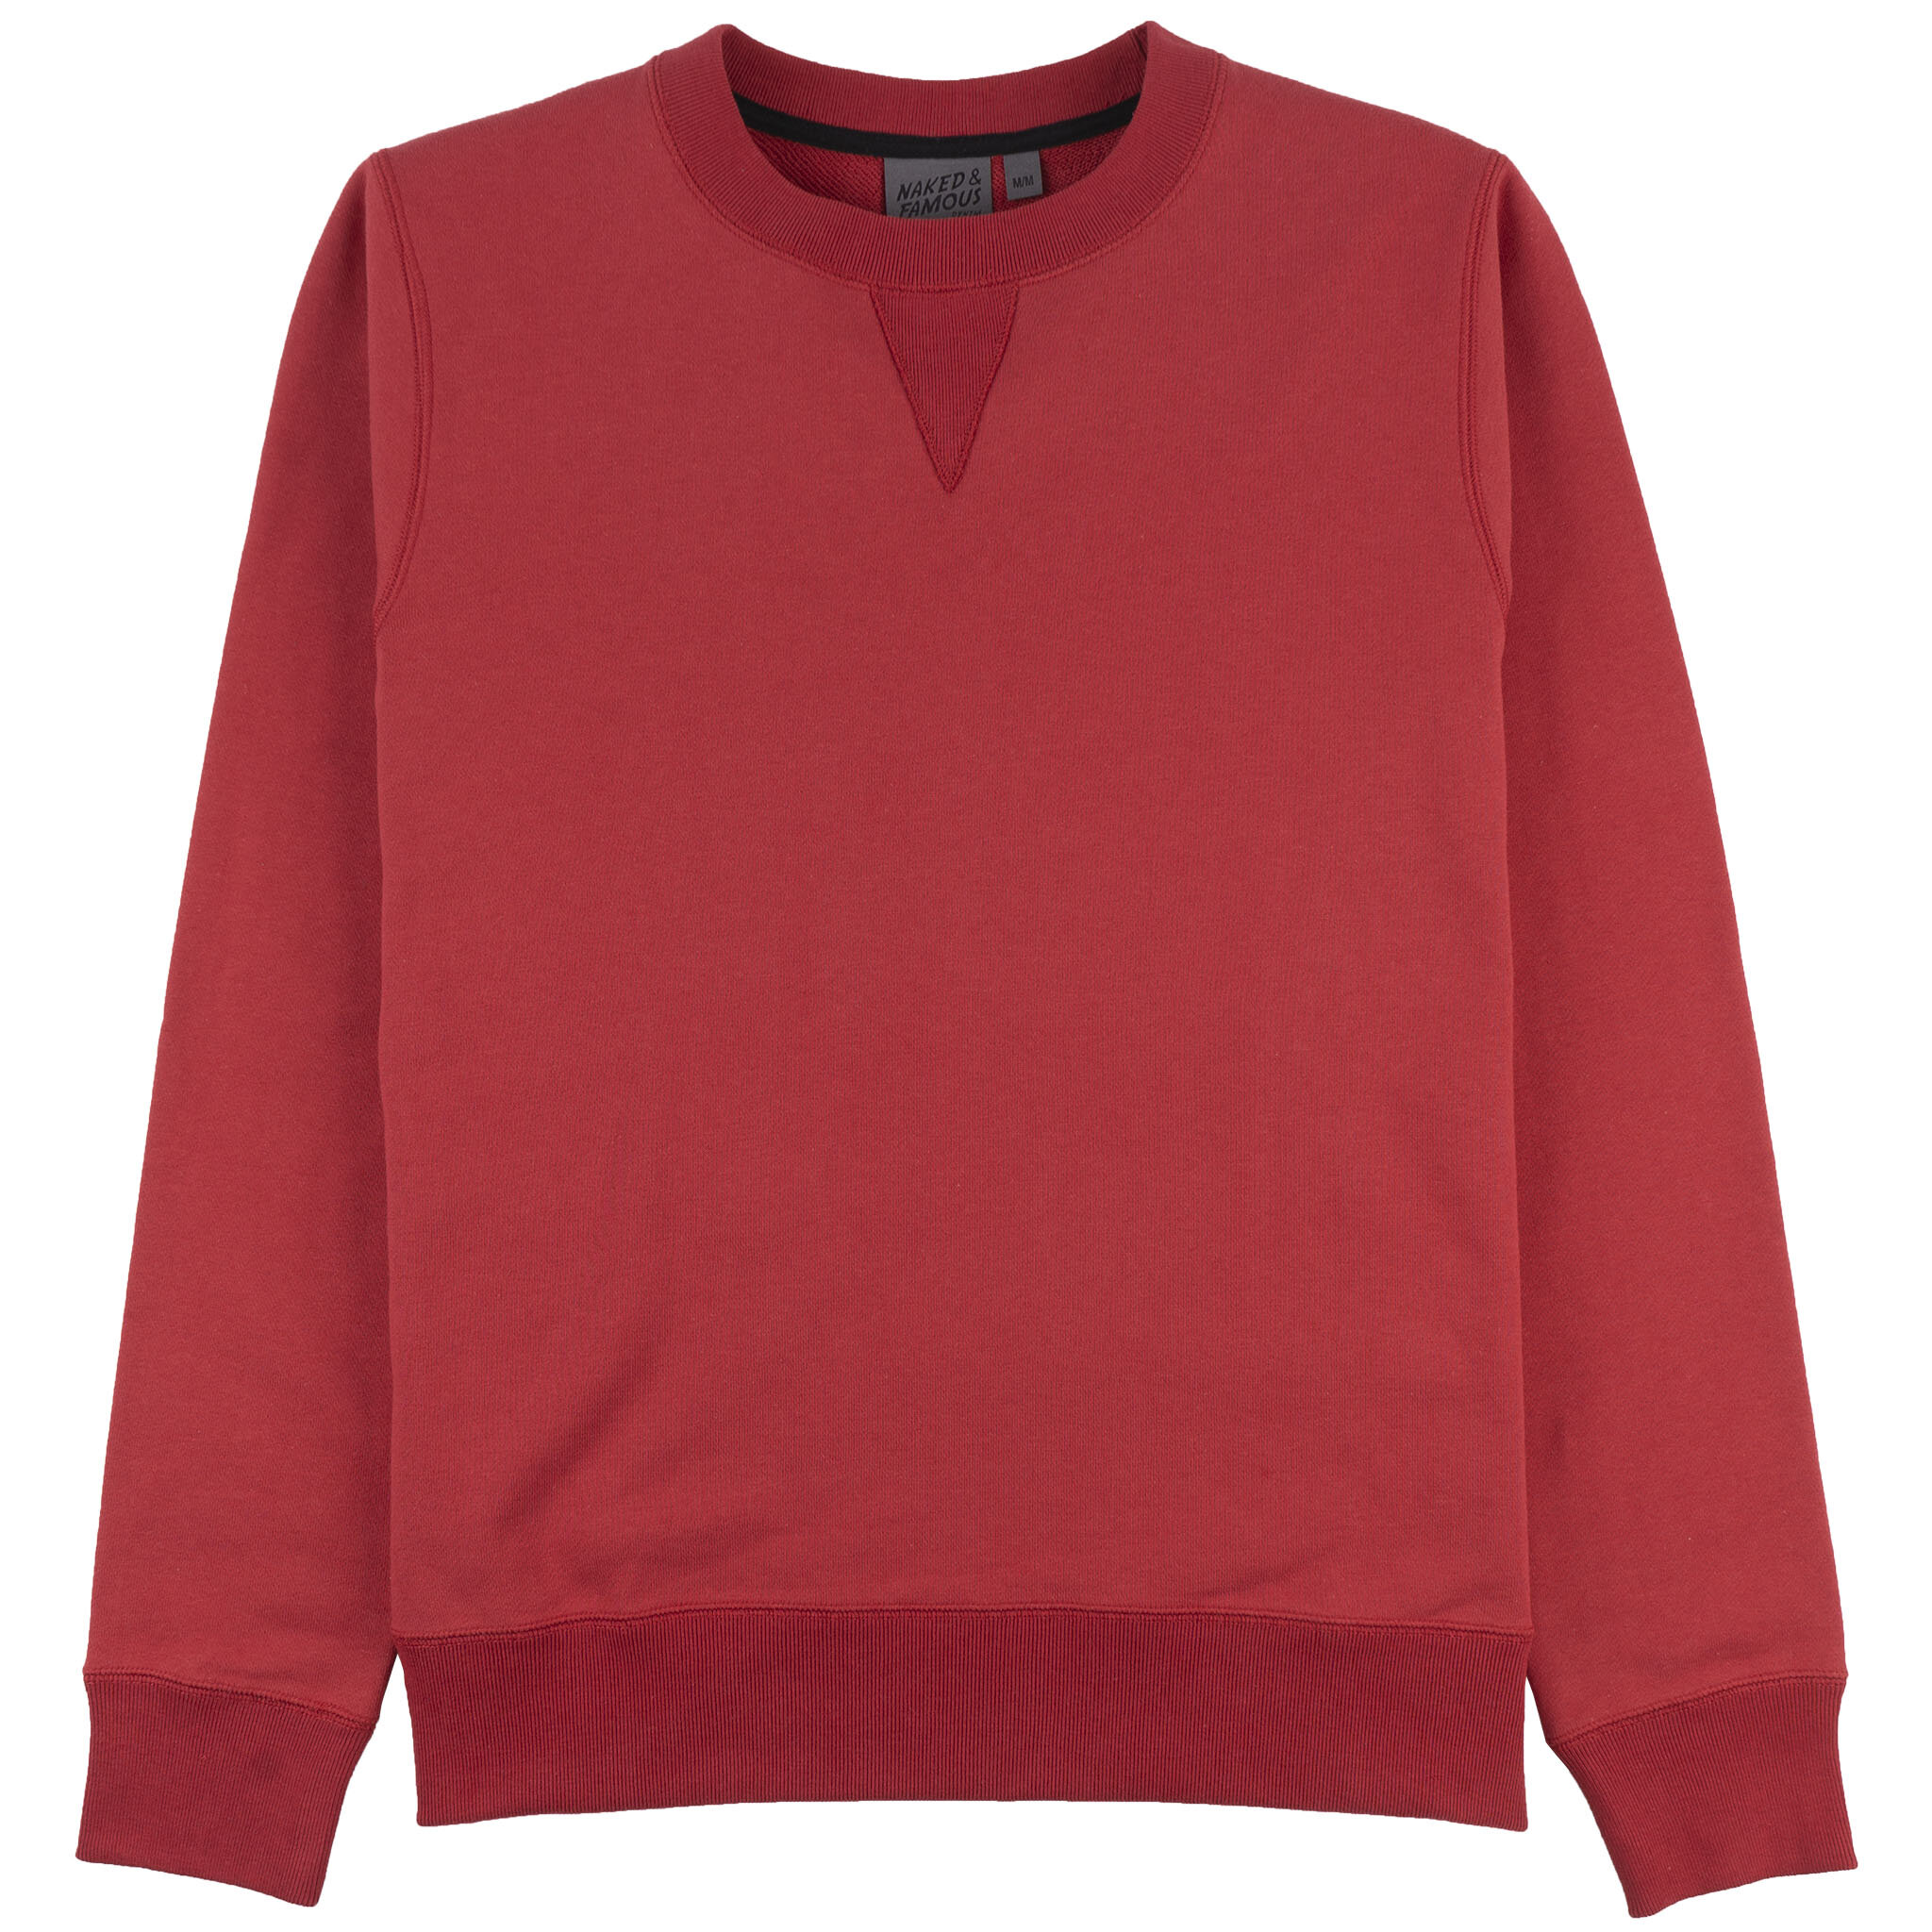  Crewneck Heavyweight Terry Red - front 